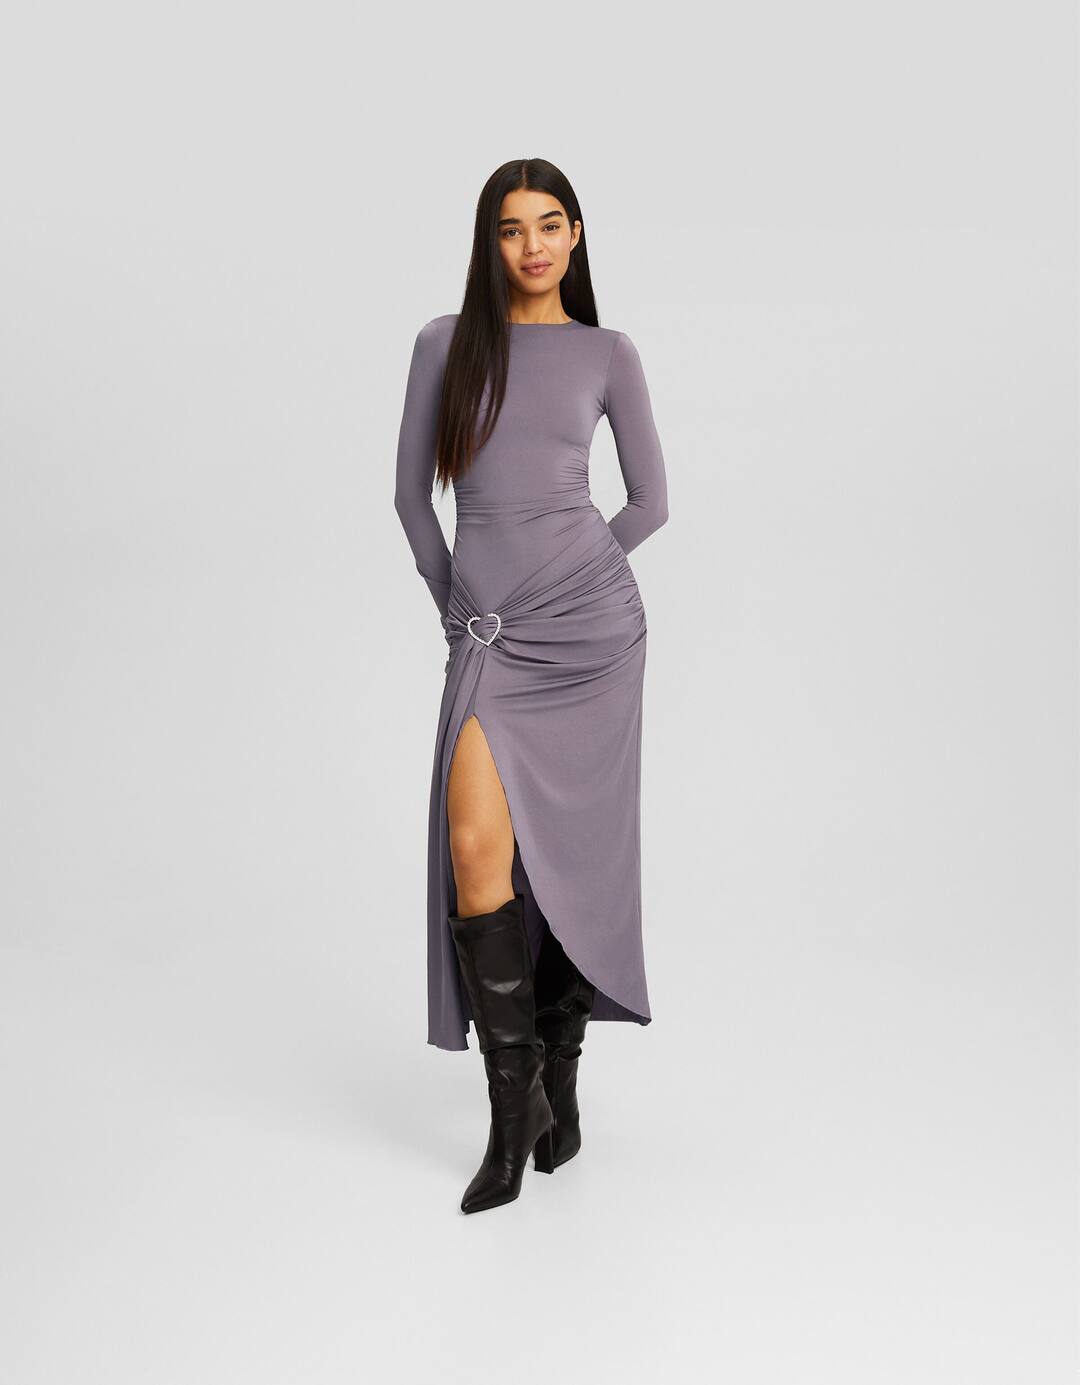 Fitted midi dress with heart detail and front slit